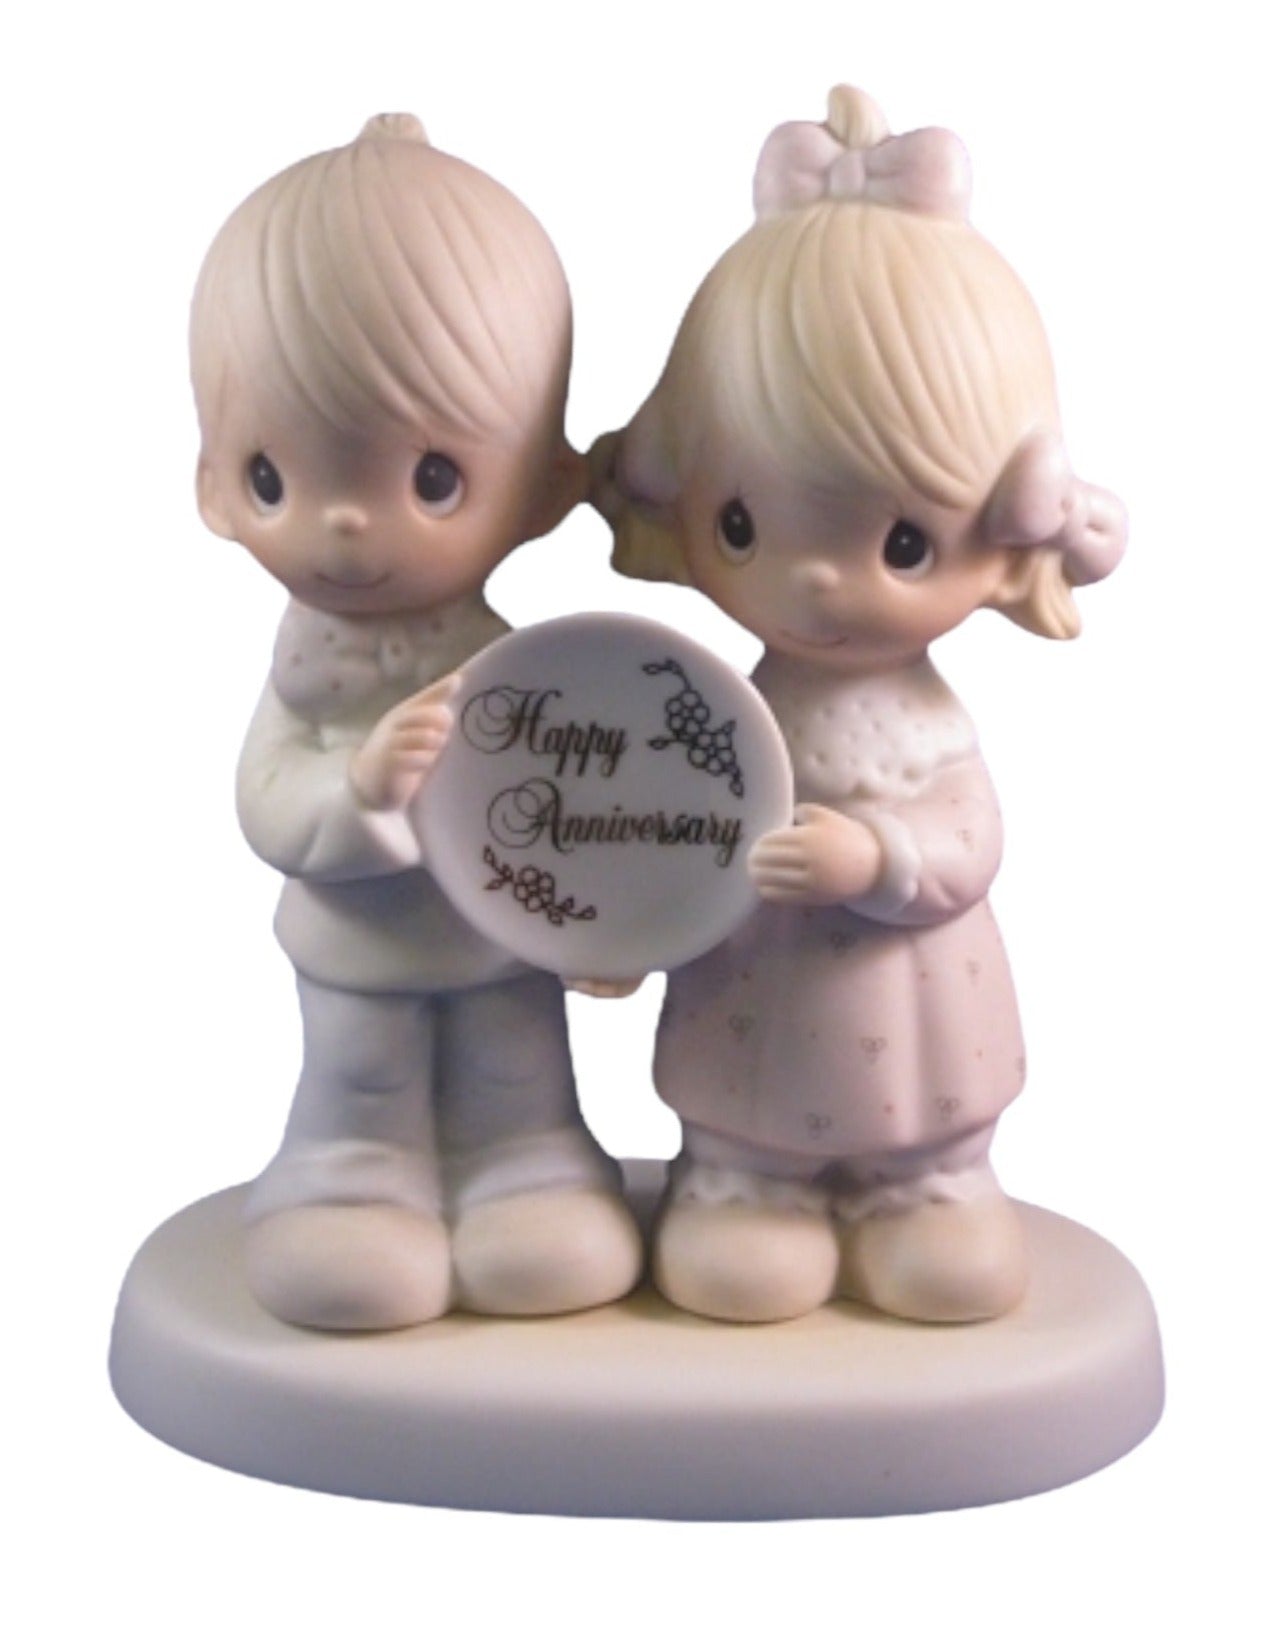 God Blessed Our Years Together With So Much Love And Happiness  - Precious Moment Figurine